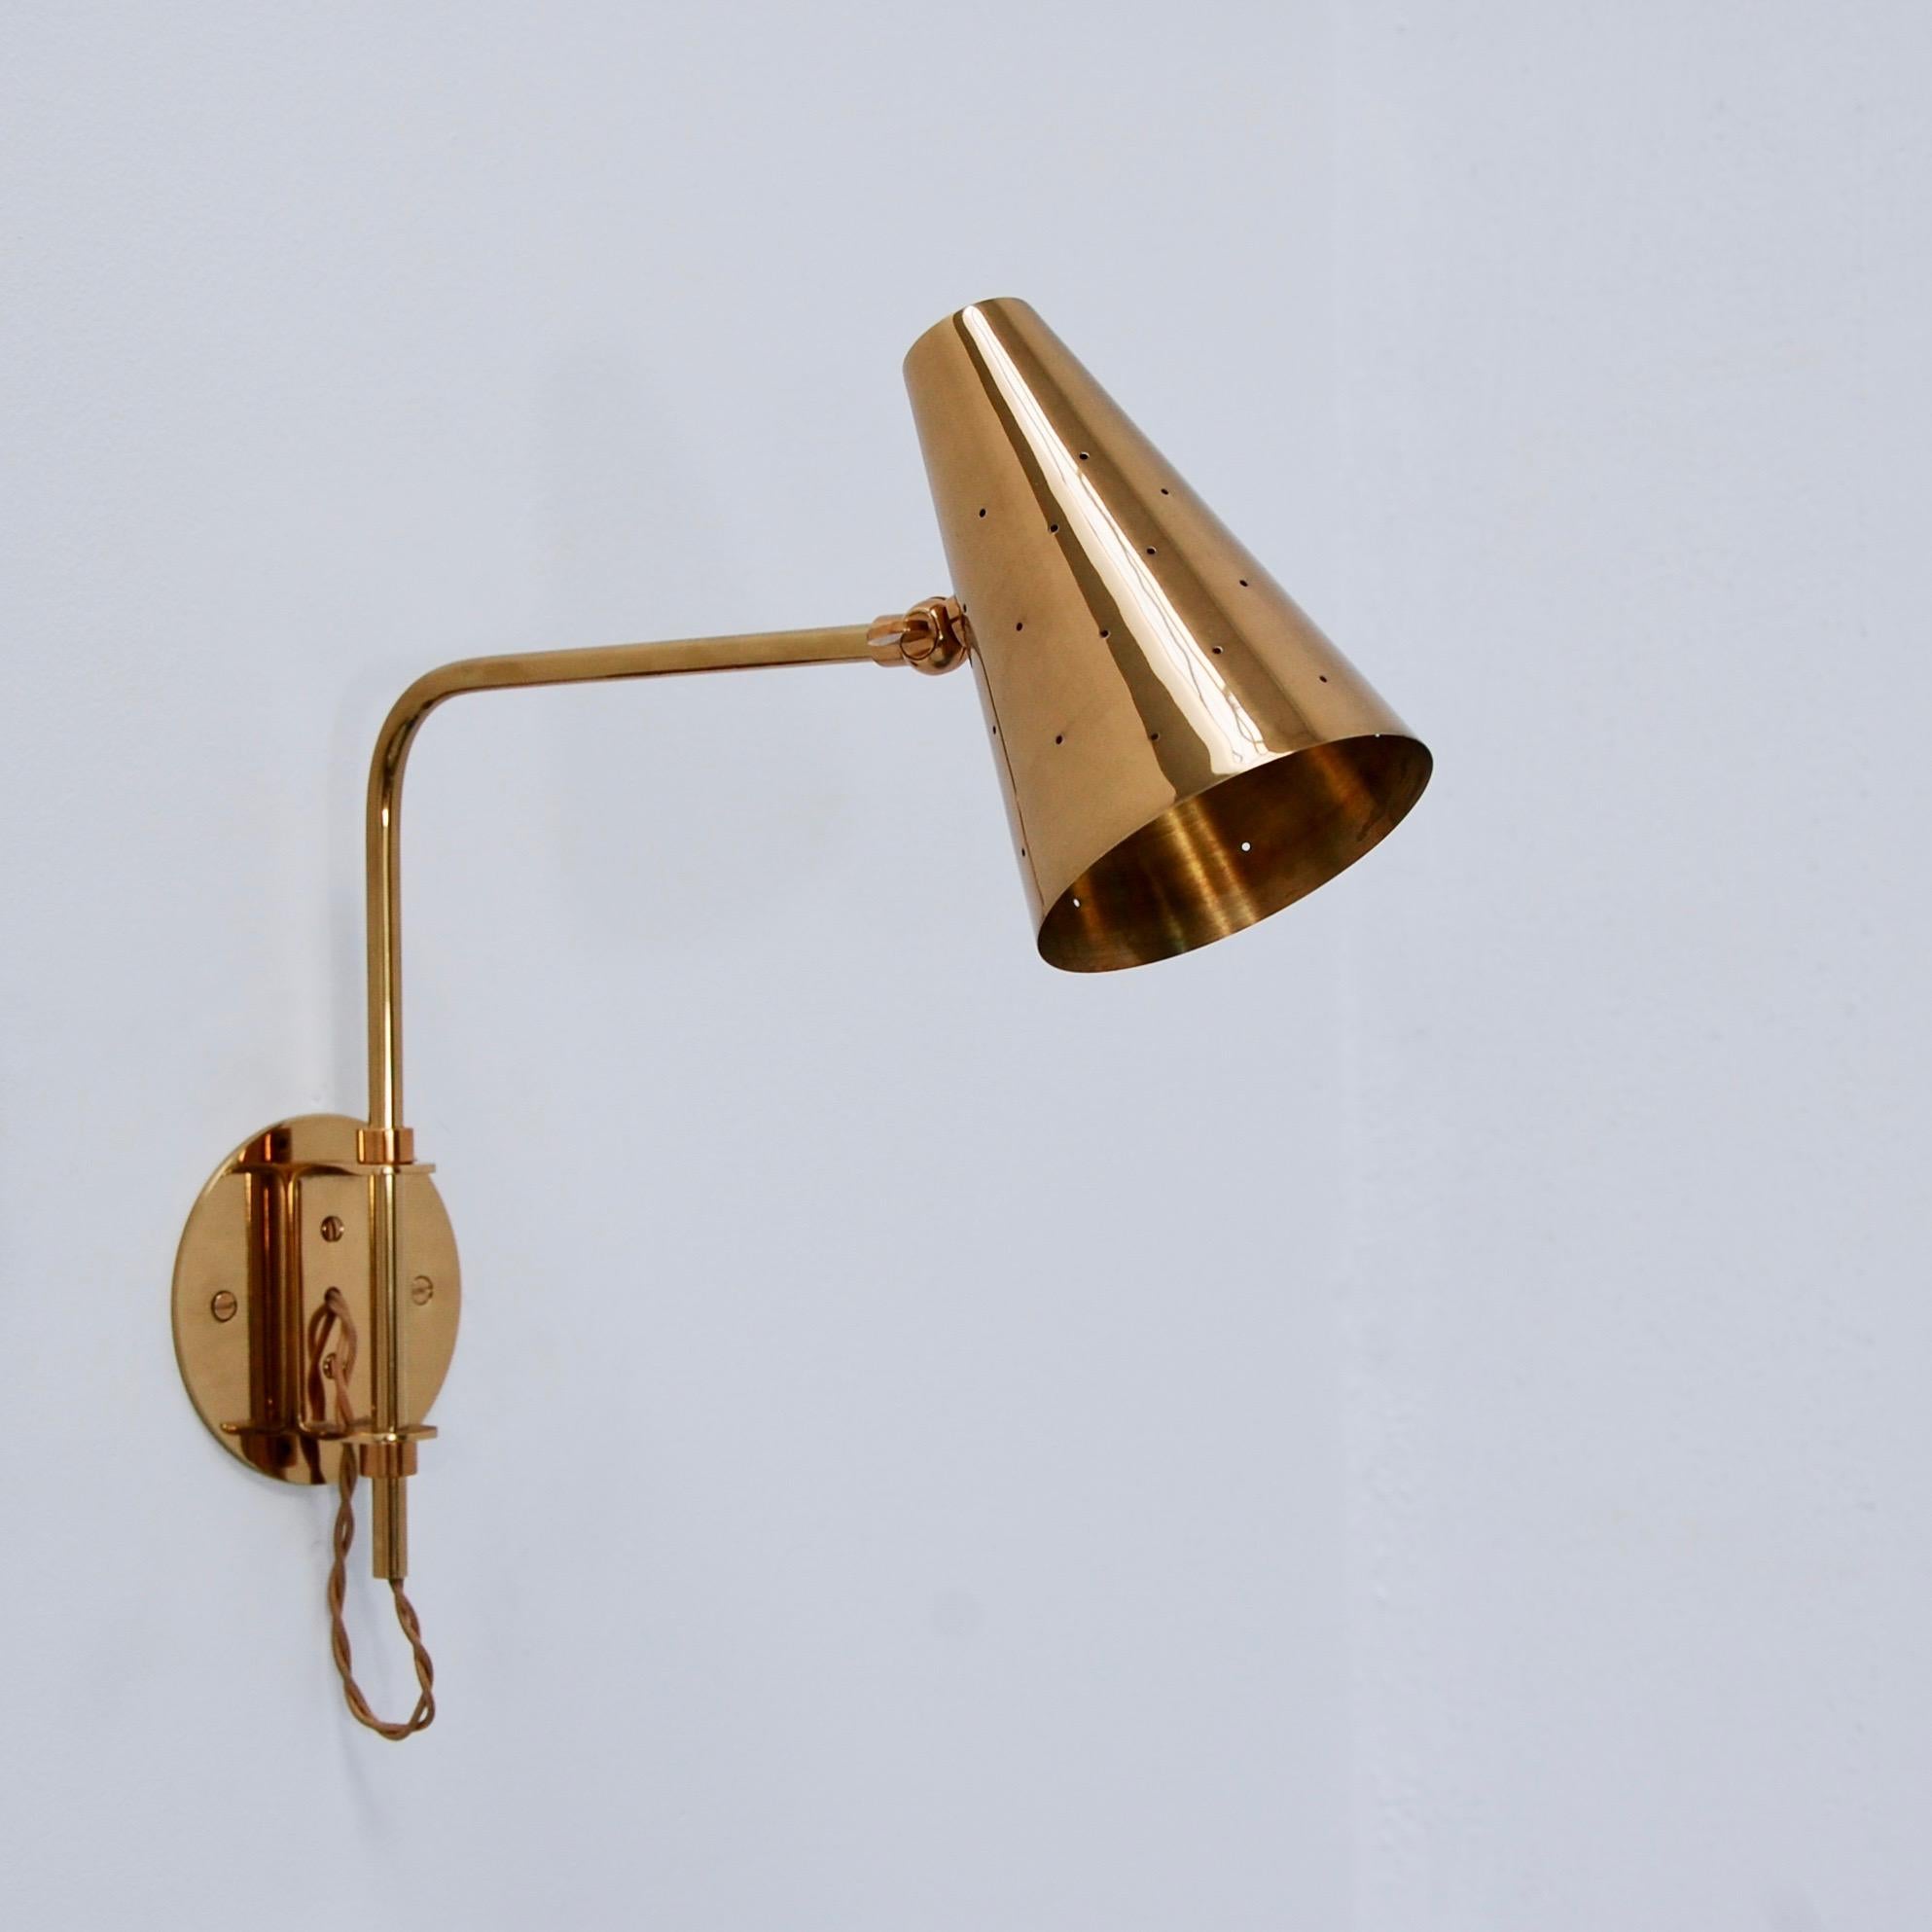 These all brass Lubrary sconces are part of the Lumfardo Luminaires contemporary collection. They can be customized in different dimensions and ordered for hard wired or as plug ins, with a switch either at the cord or at the shade. They can also be